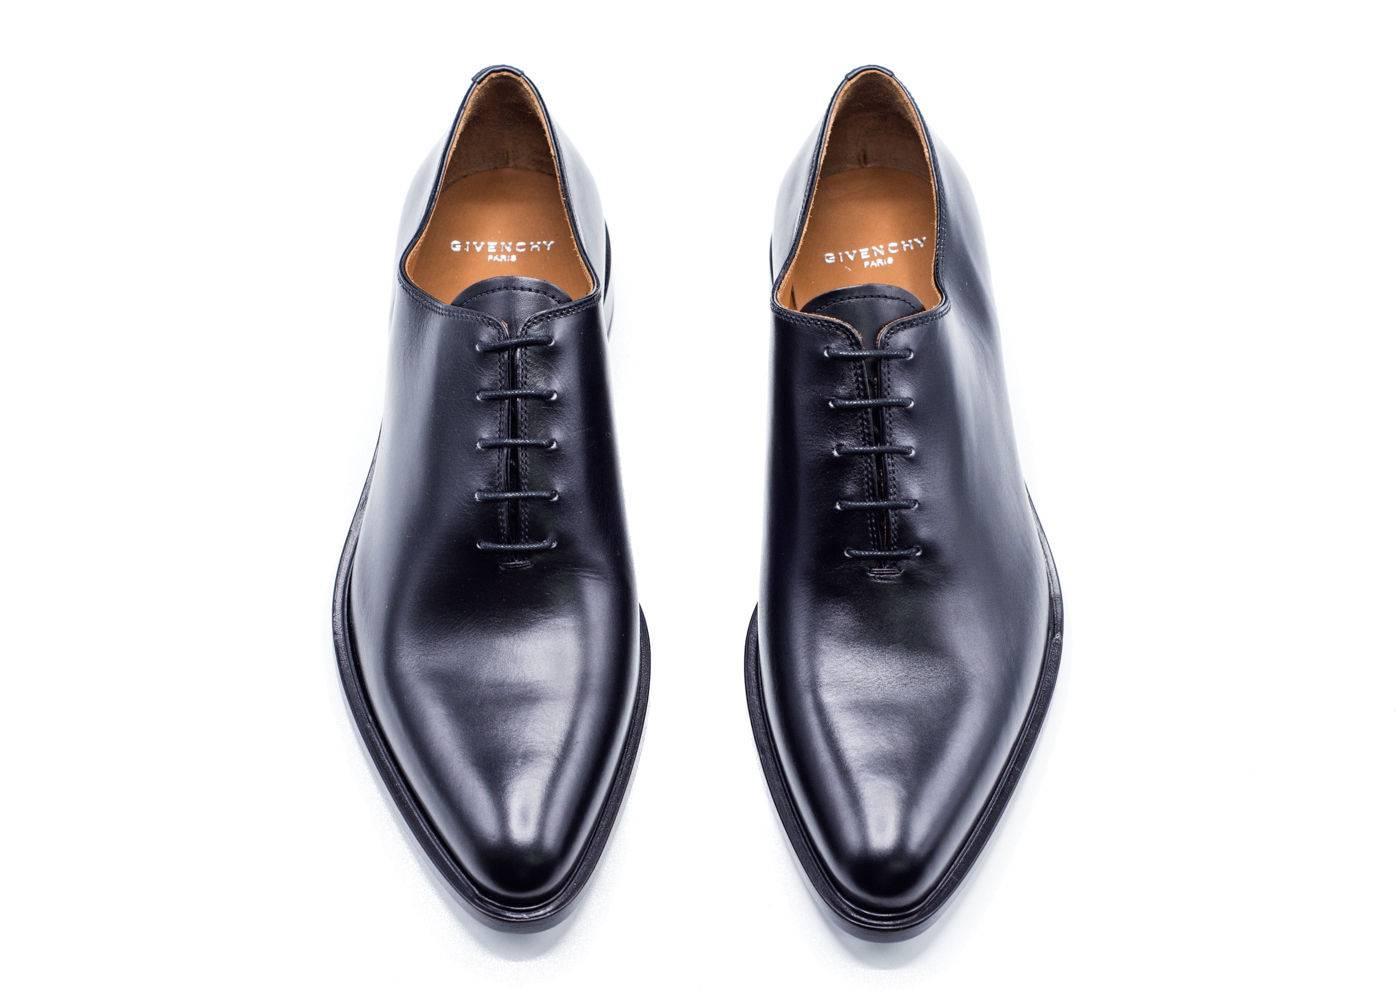 As part of Givenchy 'Prestige' line, these Oxford shoes are hand-crafted to the highest specifications in the company's manufactory. The fine black leather and clean, sweeping lines create an unfailingly elegant appearance which belies the complex